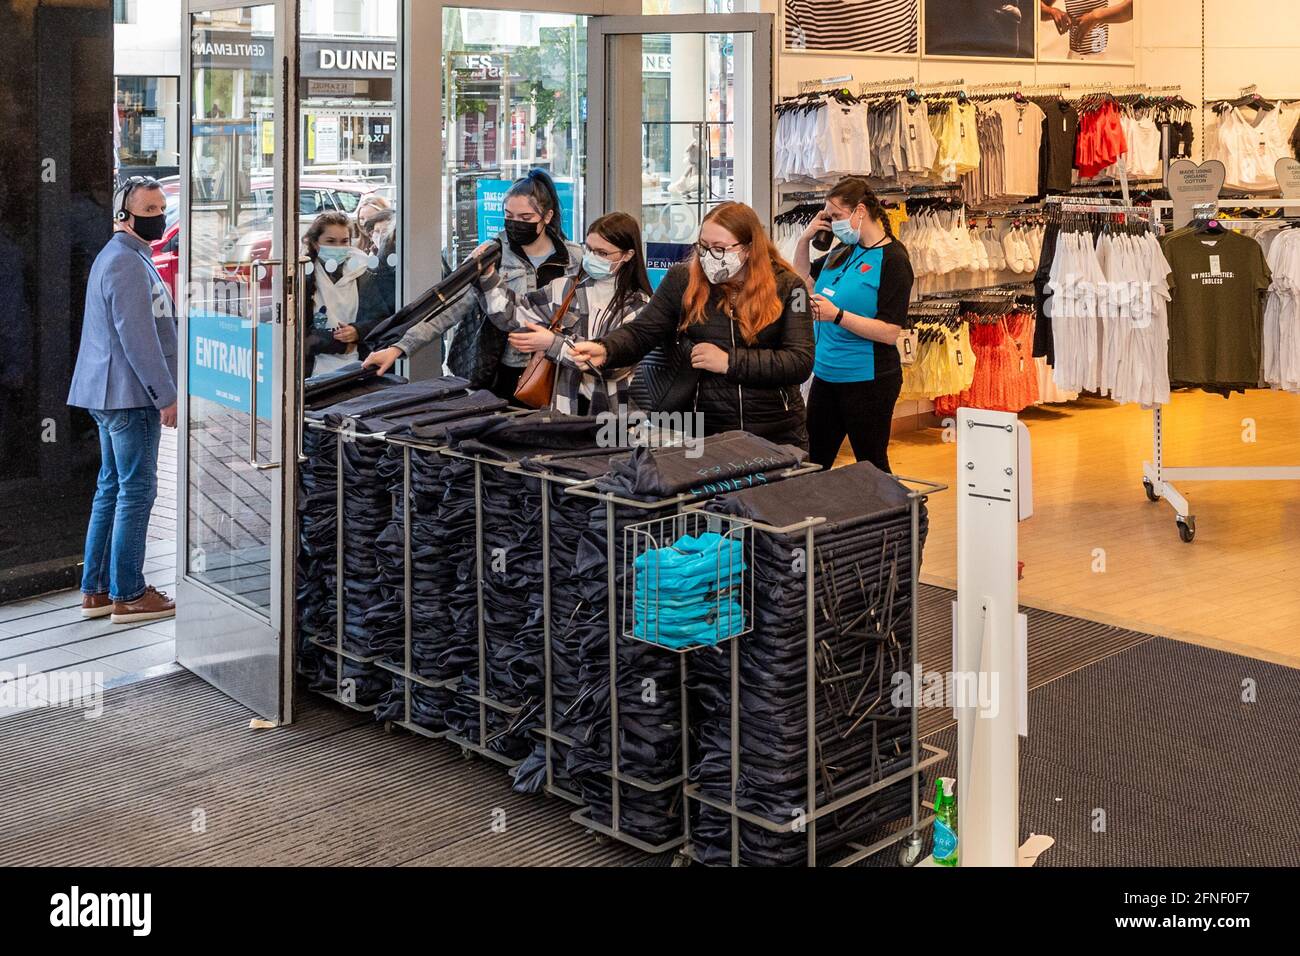 Cork, Ireland. 17th May, 2021. Penneys clothing stores around the country  fully reopened this morning. Queueing